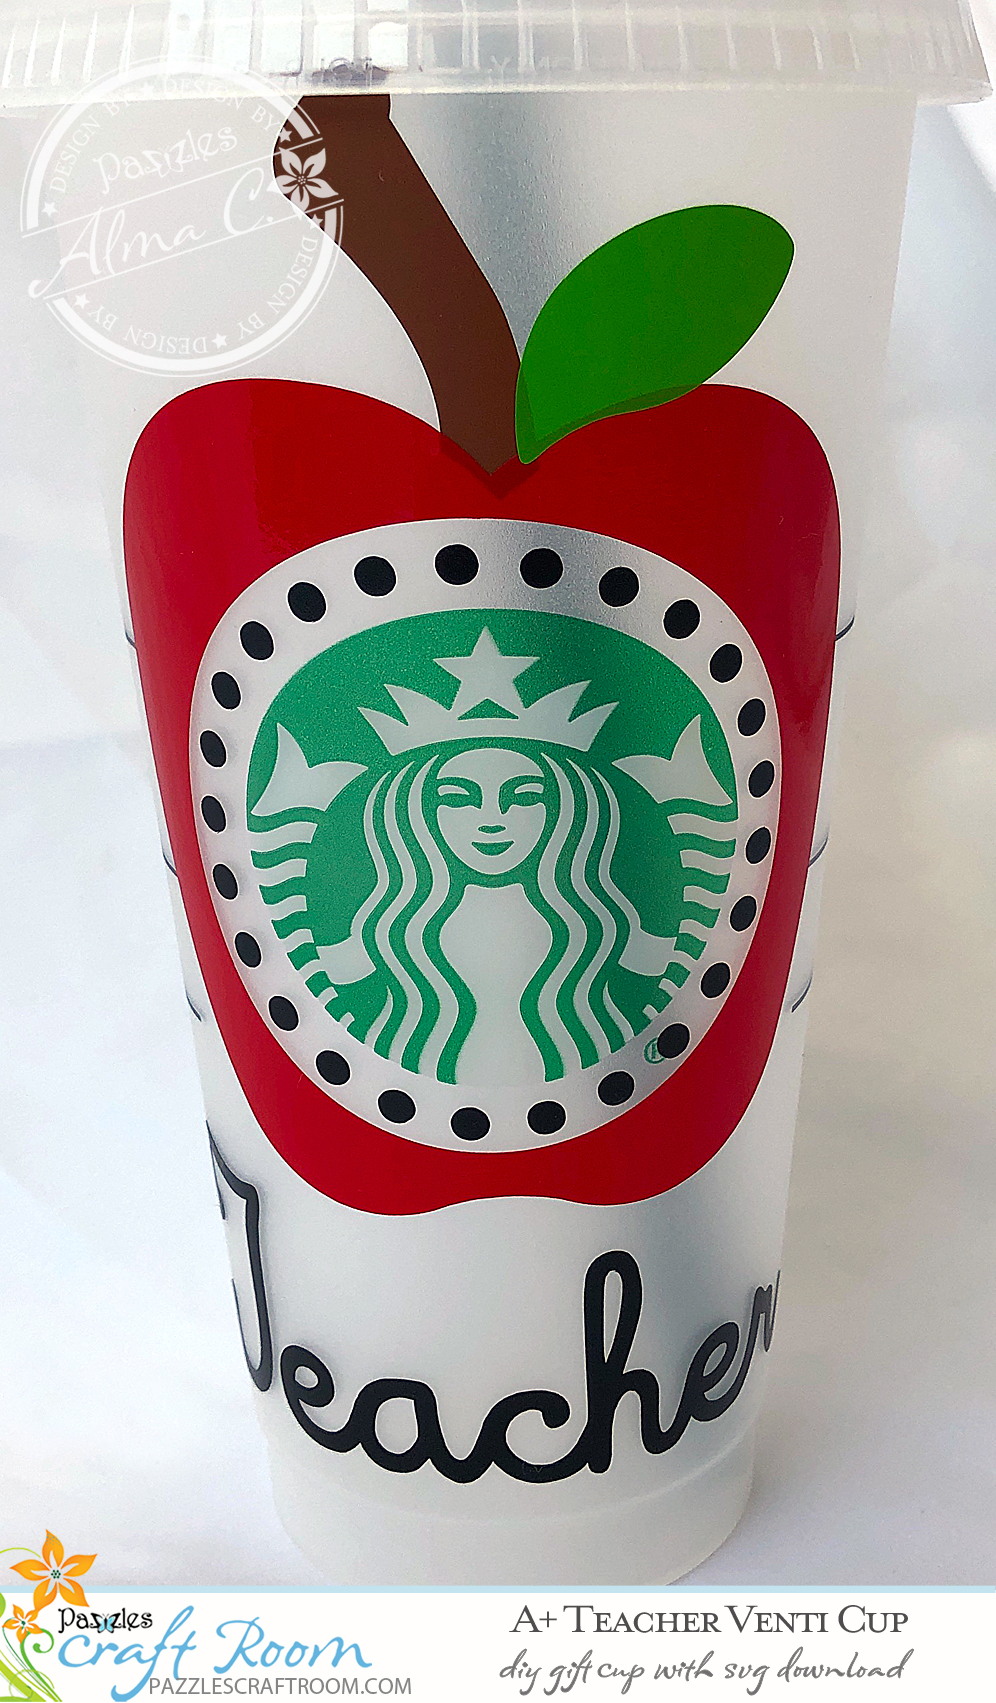 Pazzles DIY Coffee Cup Teacher Gift with instant SVG download. Compatible with all major electronic cutters including Pazzles Inspiration, Cricut, and Silhouette Cameo. Design by Alma Cervantes.